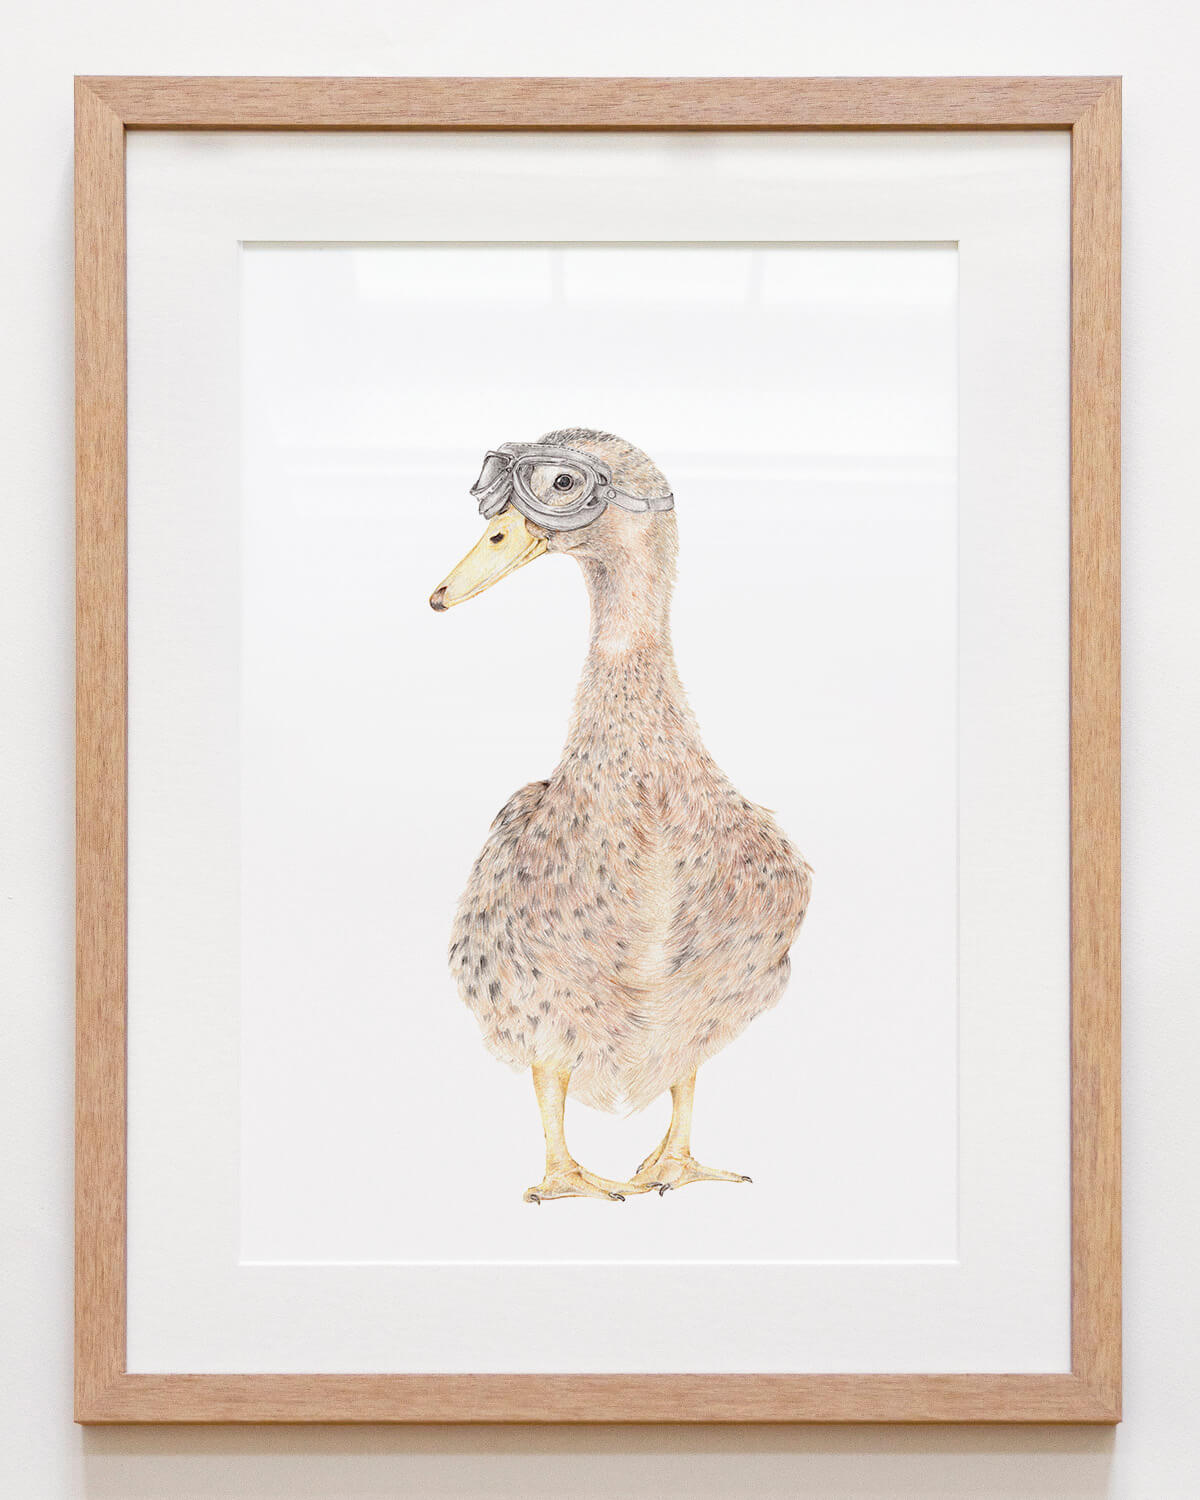 Framed nursery wall art of a duck with goggles